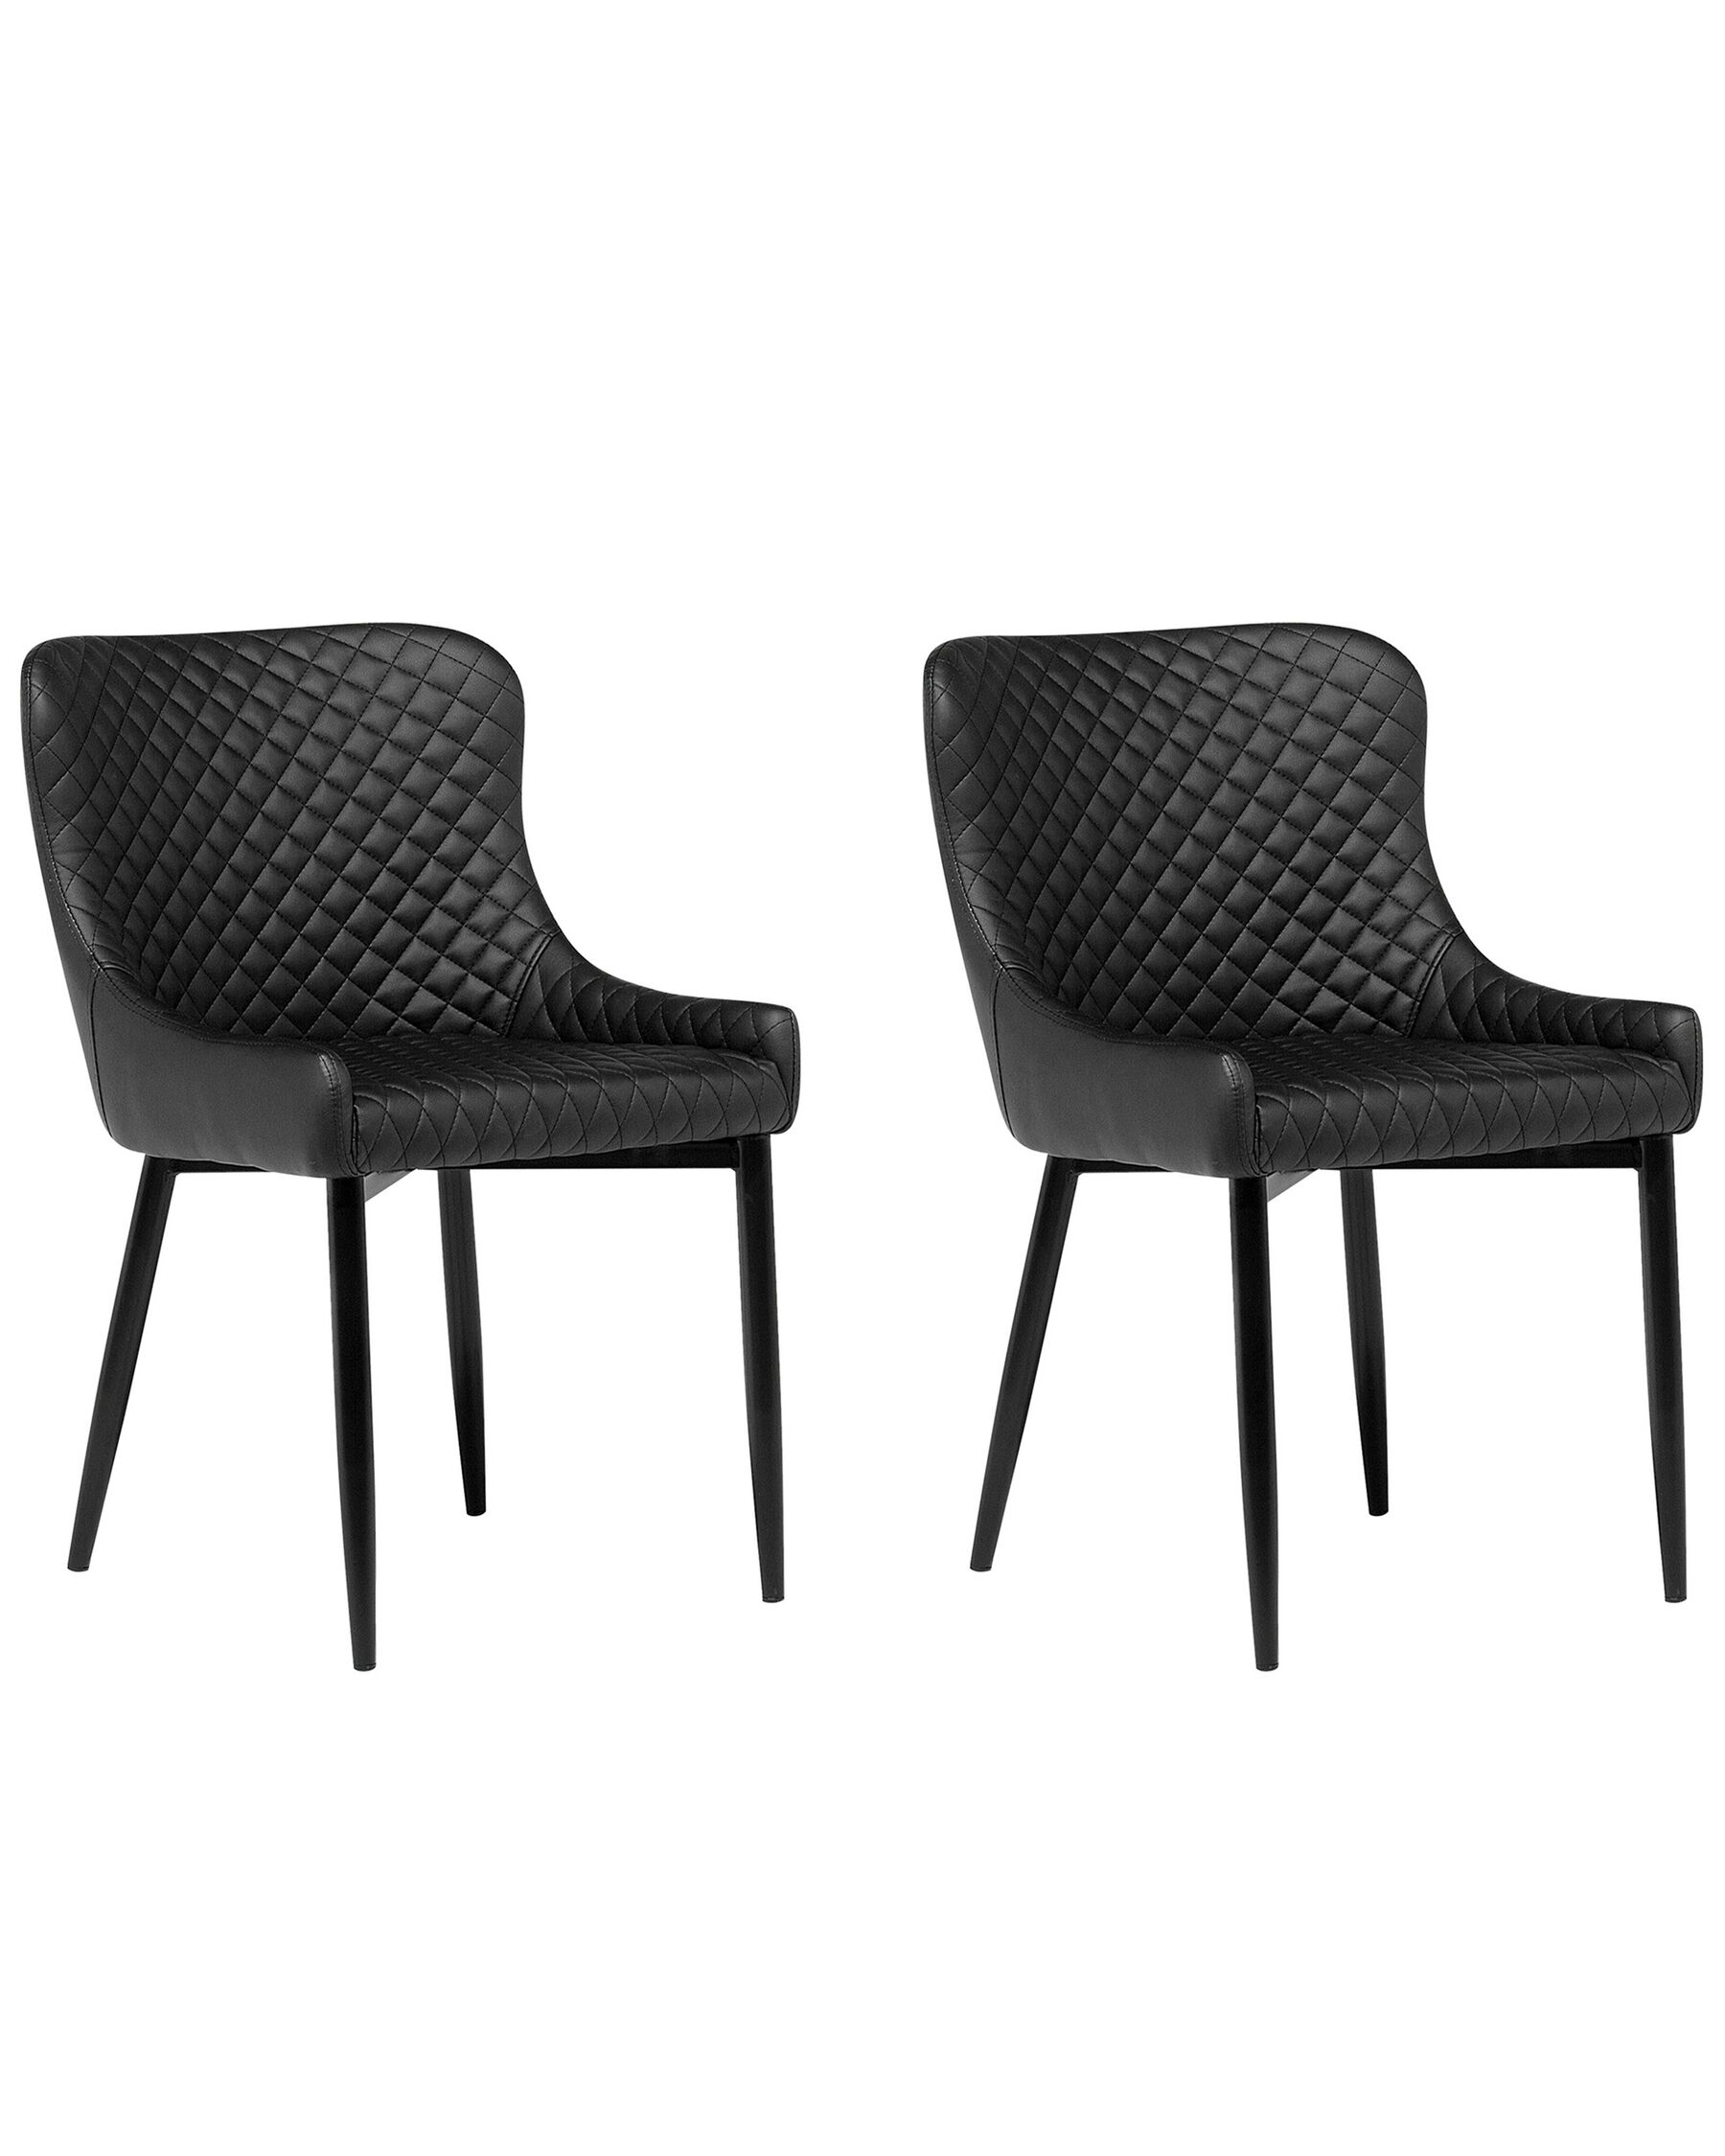 Stylish Dining Chair Set of 2 Pieces Faux Leather Black Solano -